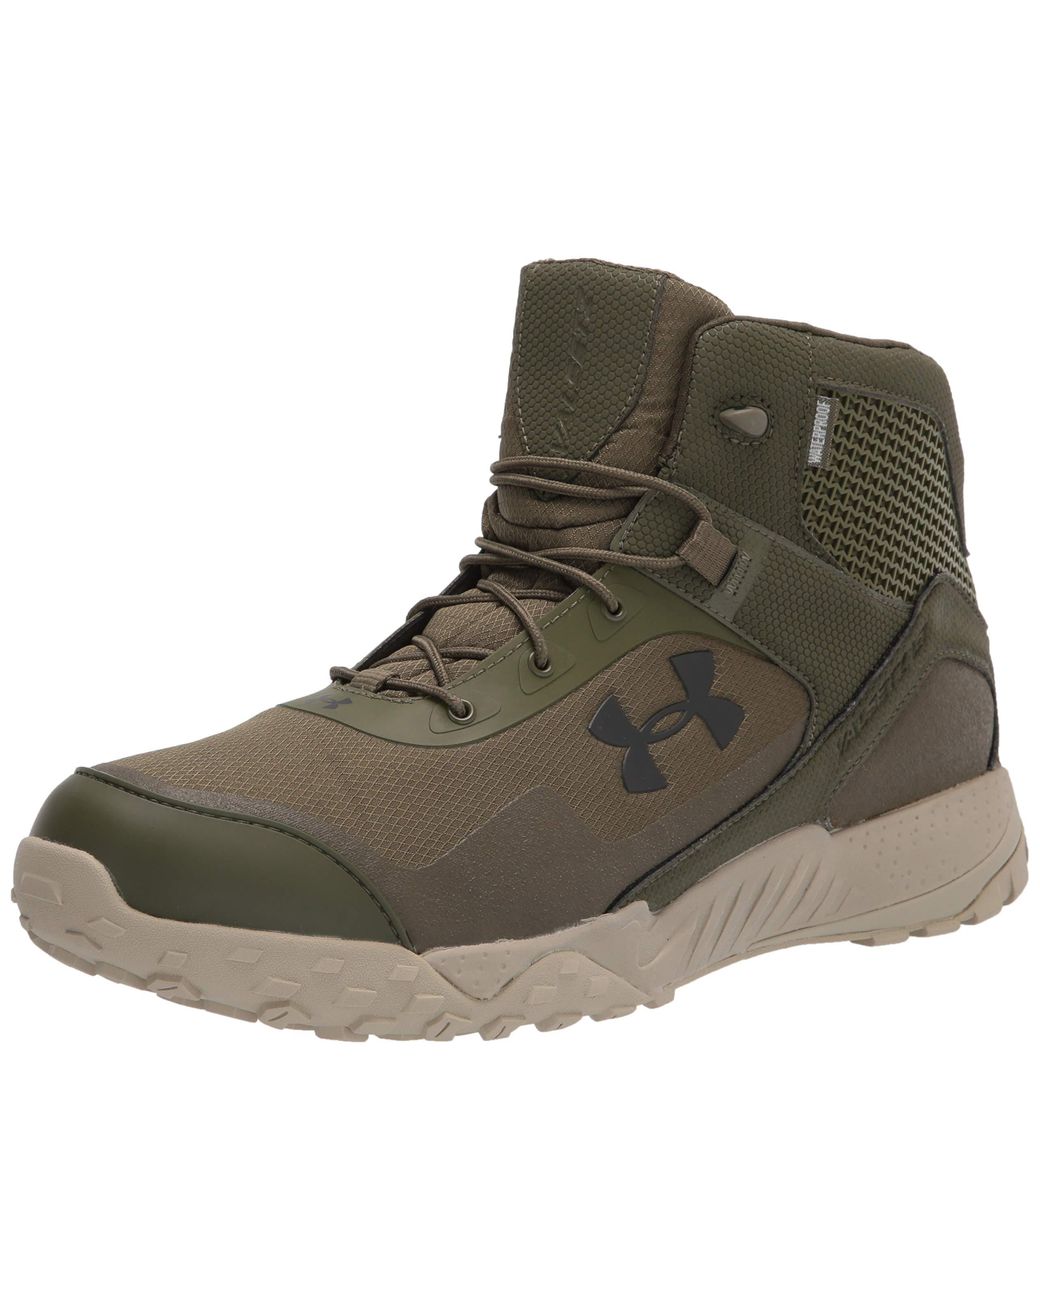 Under Armour Valsetz Rts 1.5 5-inch Waterproof Military And Tactical ...